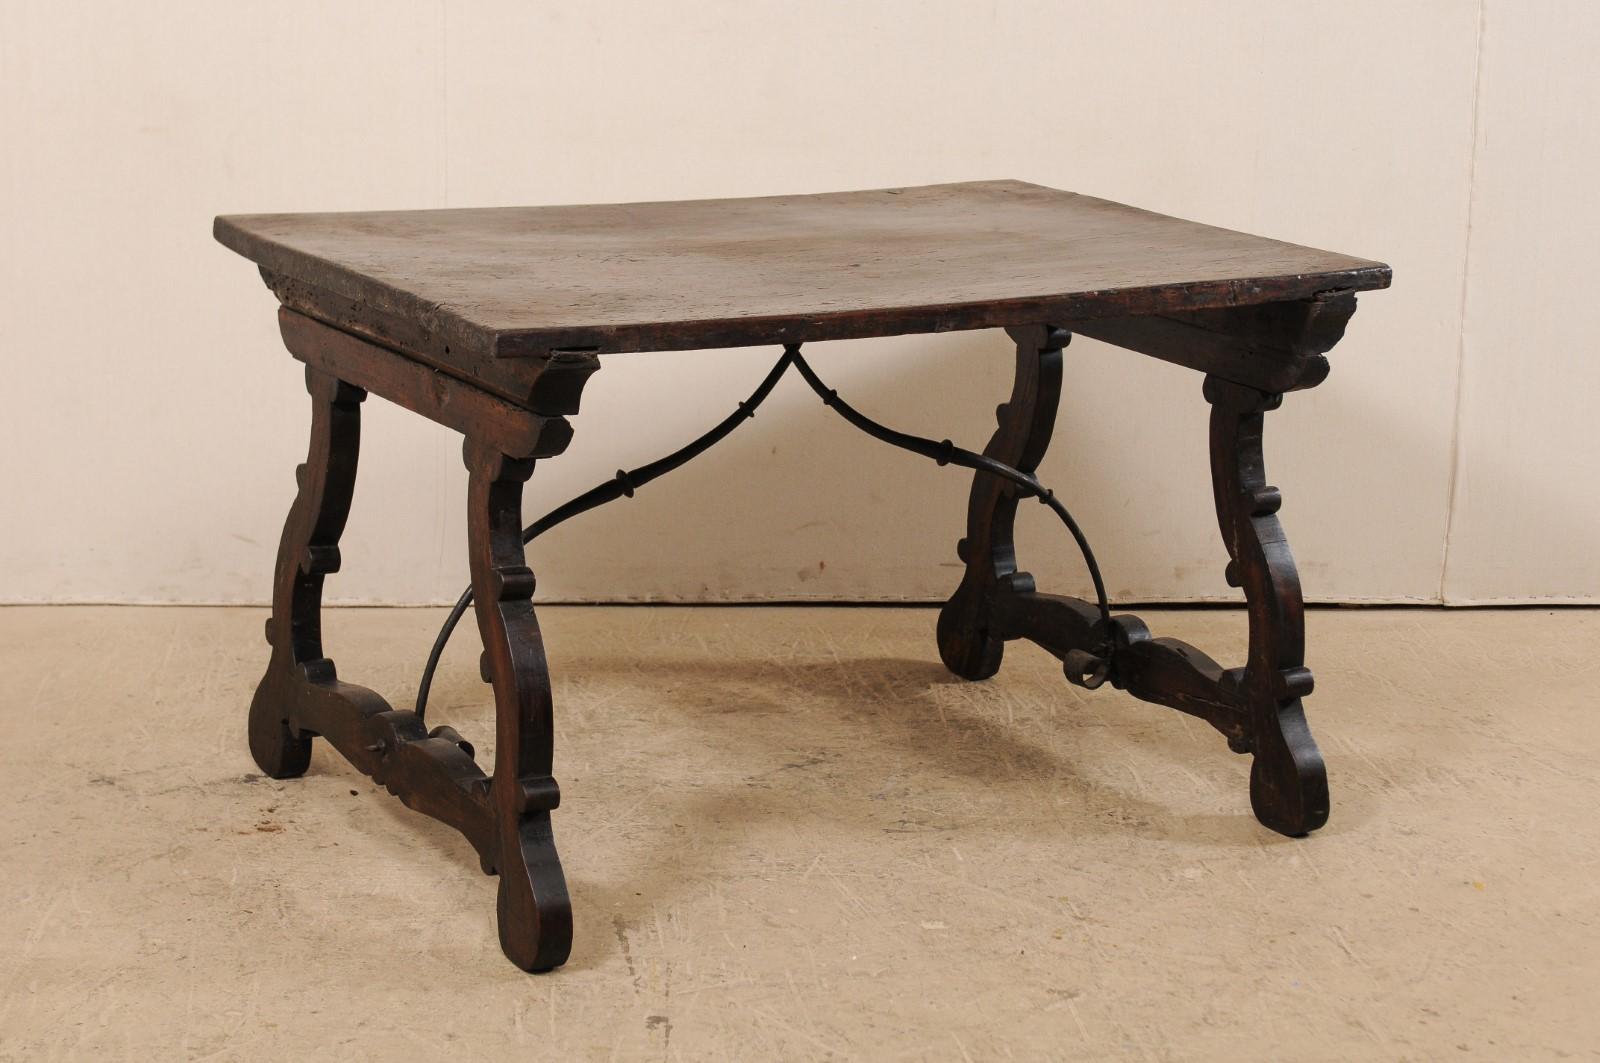 A late 18th century Italian trestle table with iron stretcher. This antique table from Italy features a rectangular-shaped top from a single piece of walnut wood, which is raised upon a pair of fluidly-carved trestle styled legs at either end. The